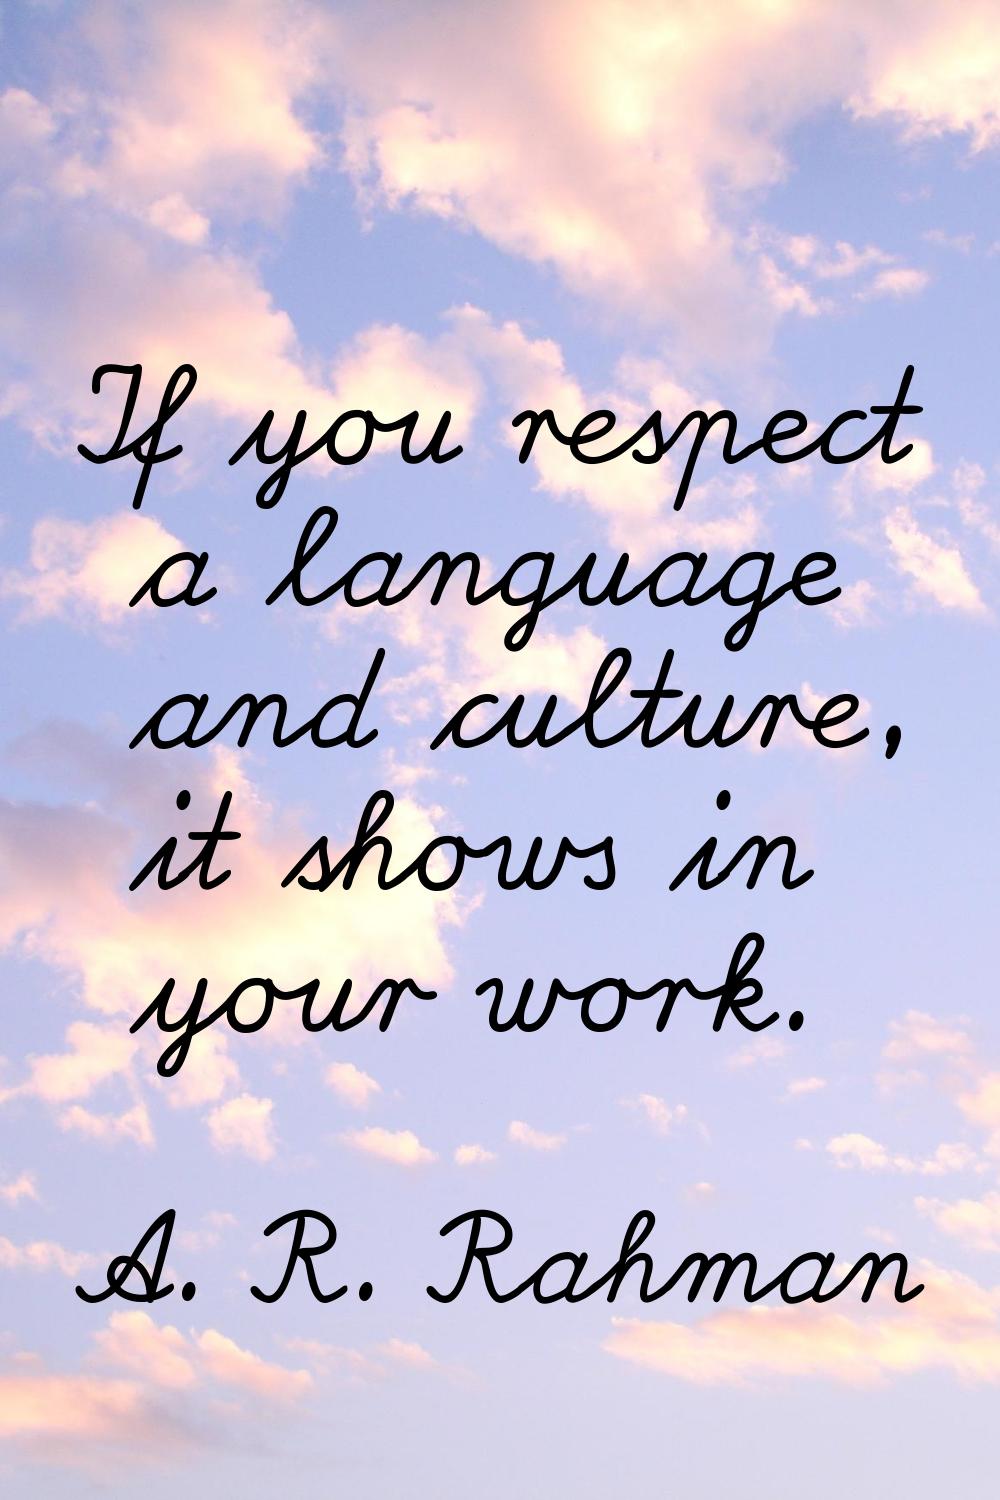 If you respect a language and culture, it shows in your work.